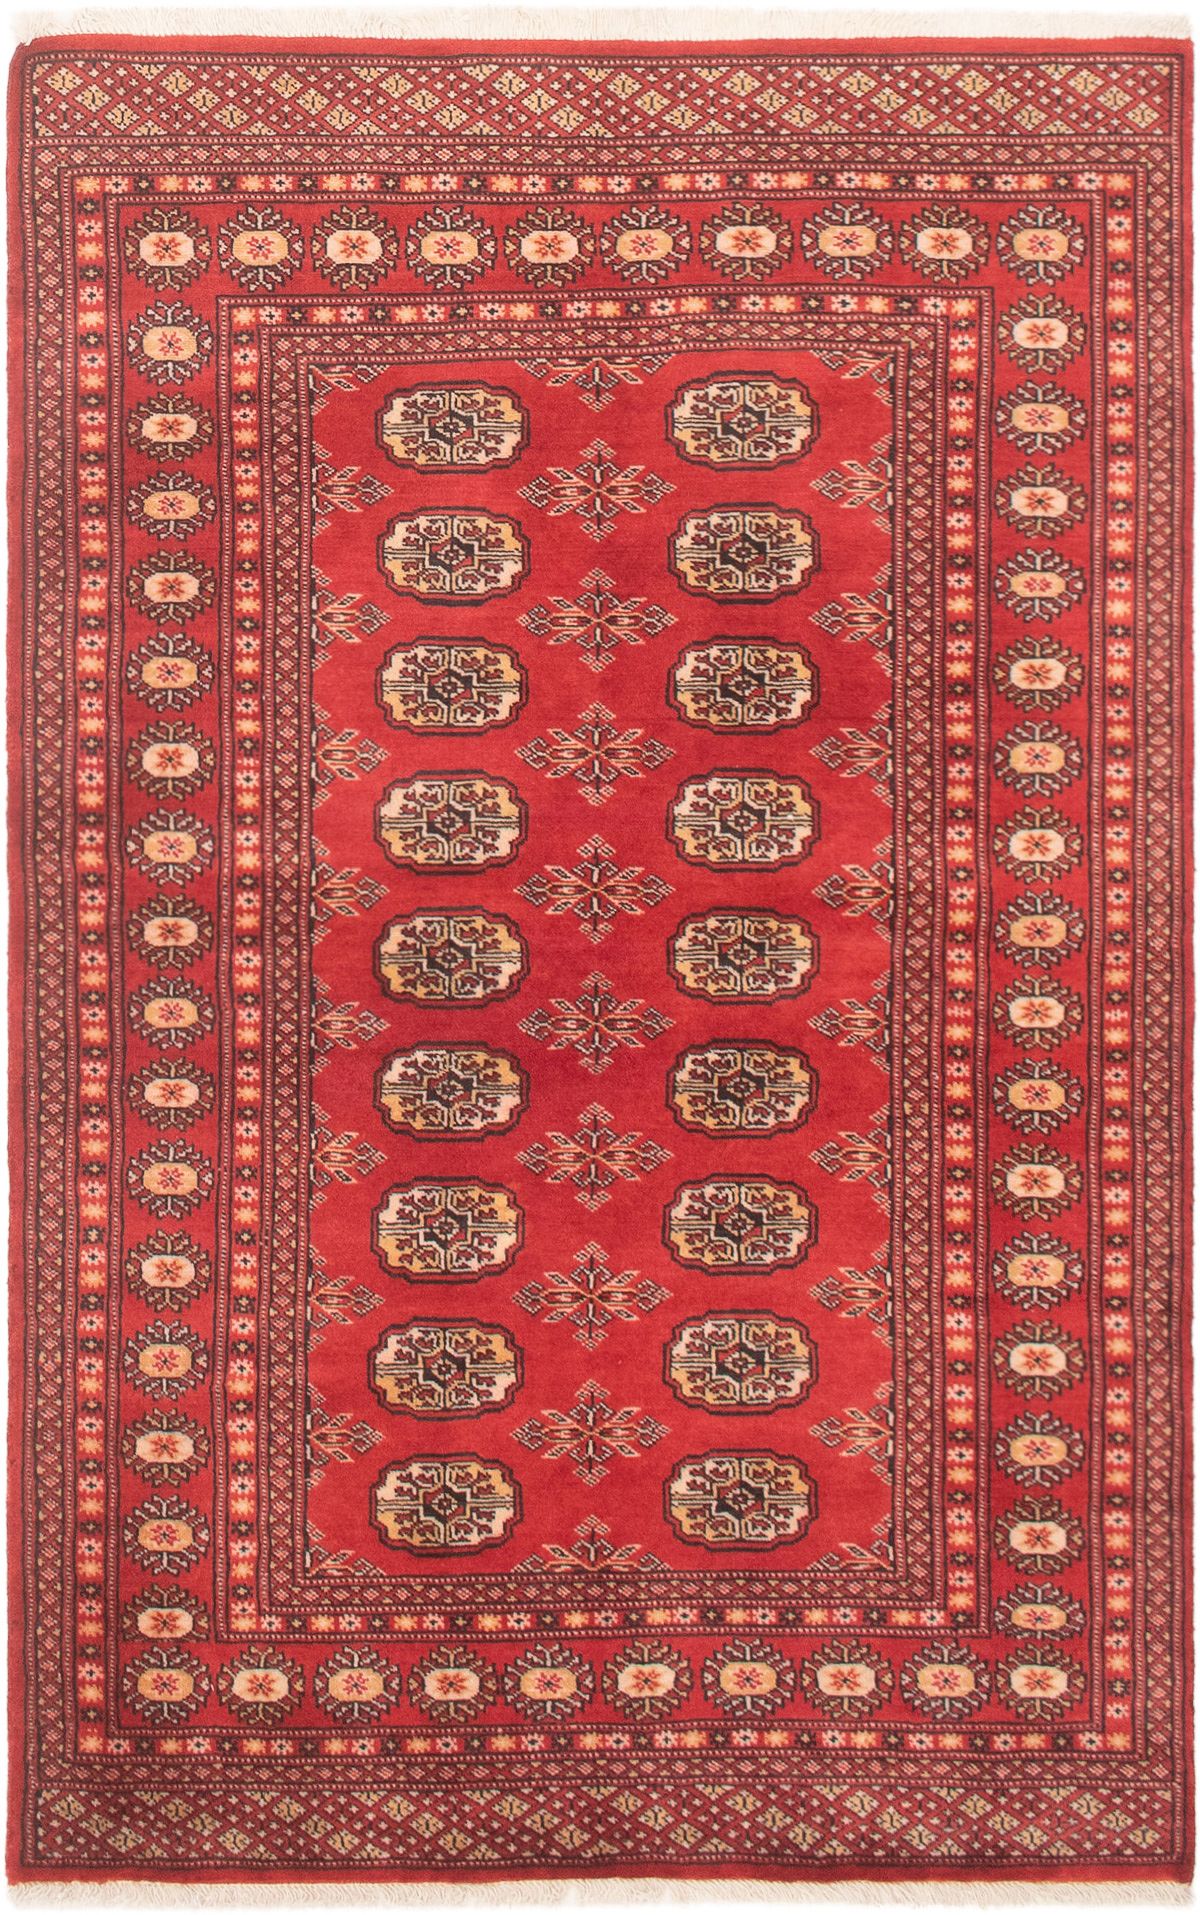 Hand-knotted Finest Peshawar Bokhara Red Wool Rug 3'11" x 6'1" Size: 3'11" x 6'1"  